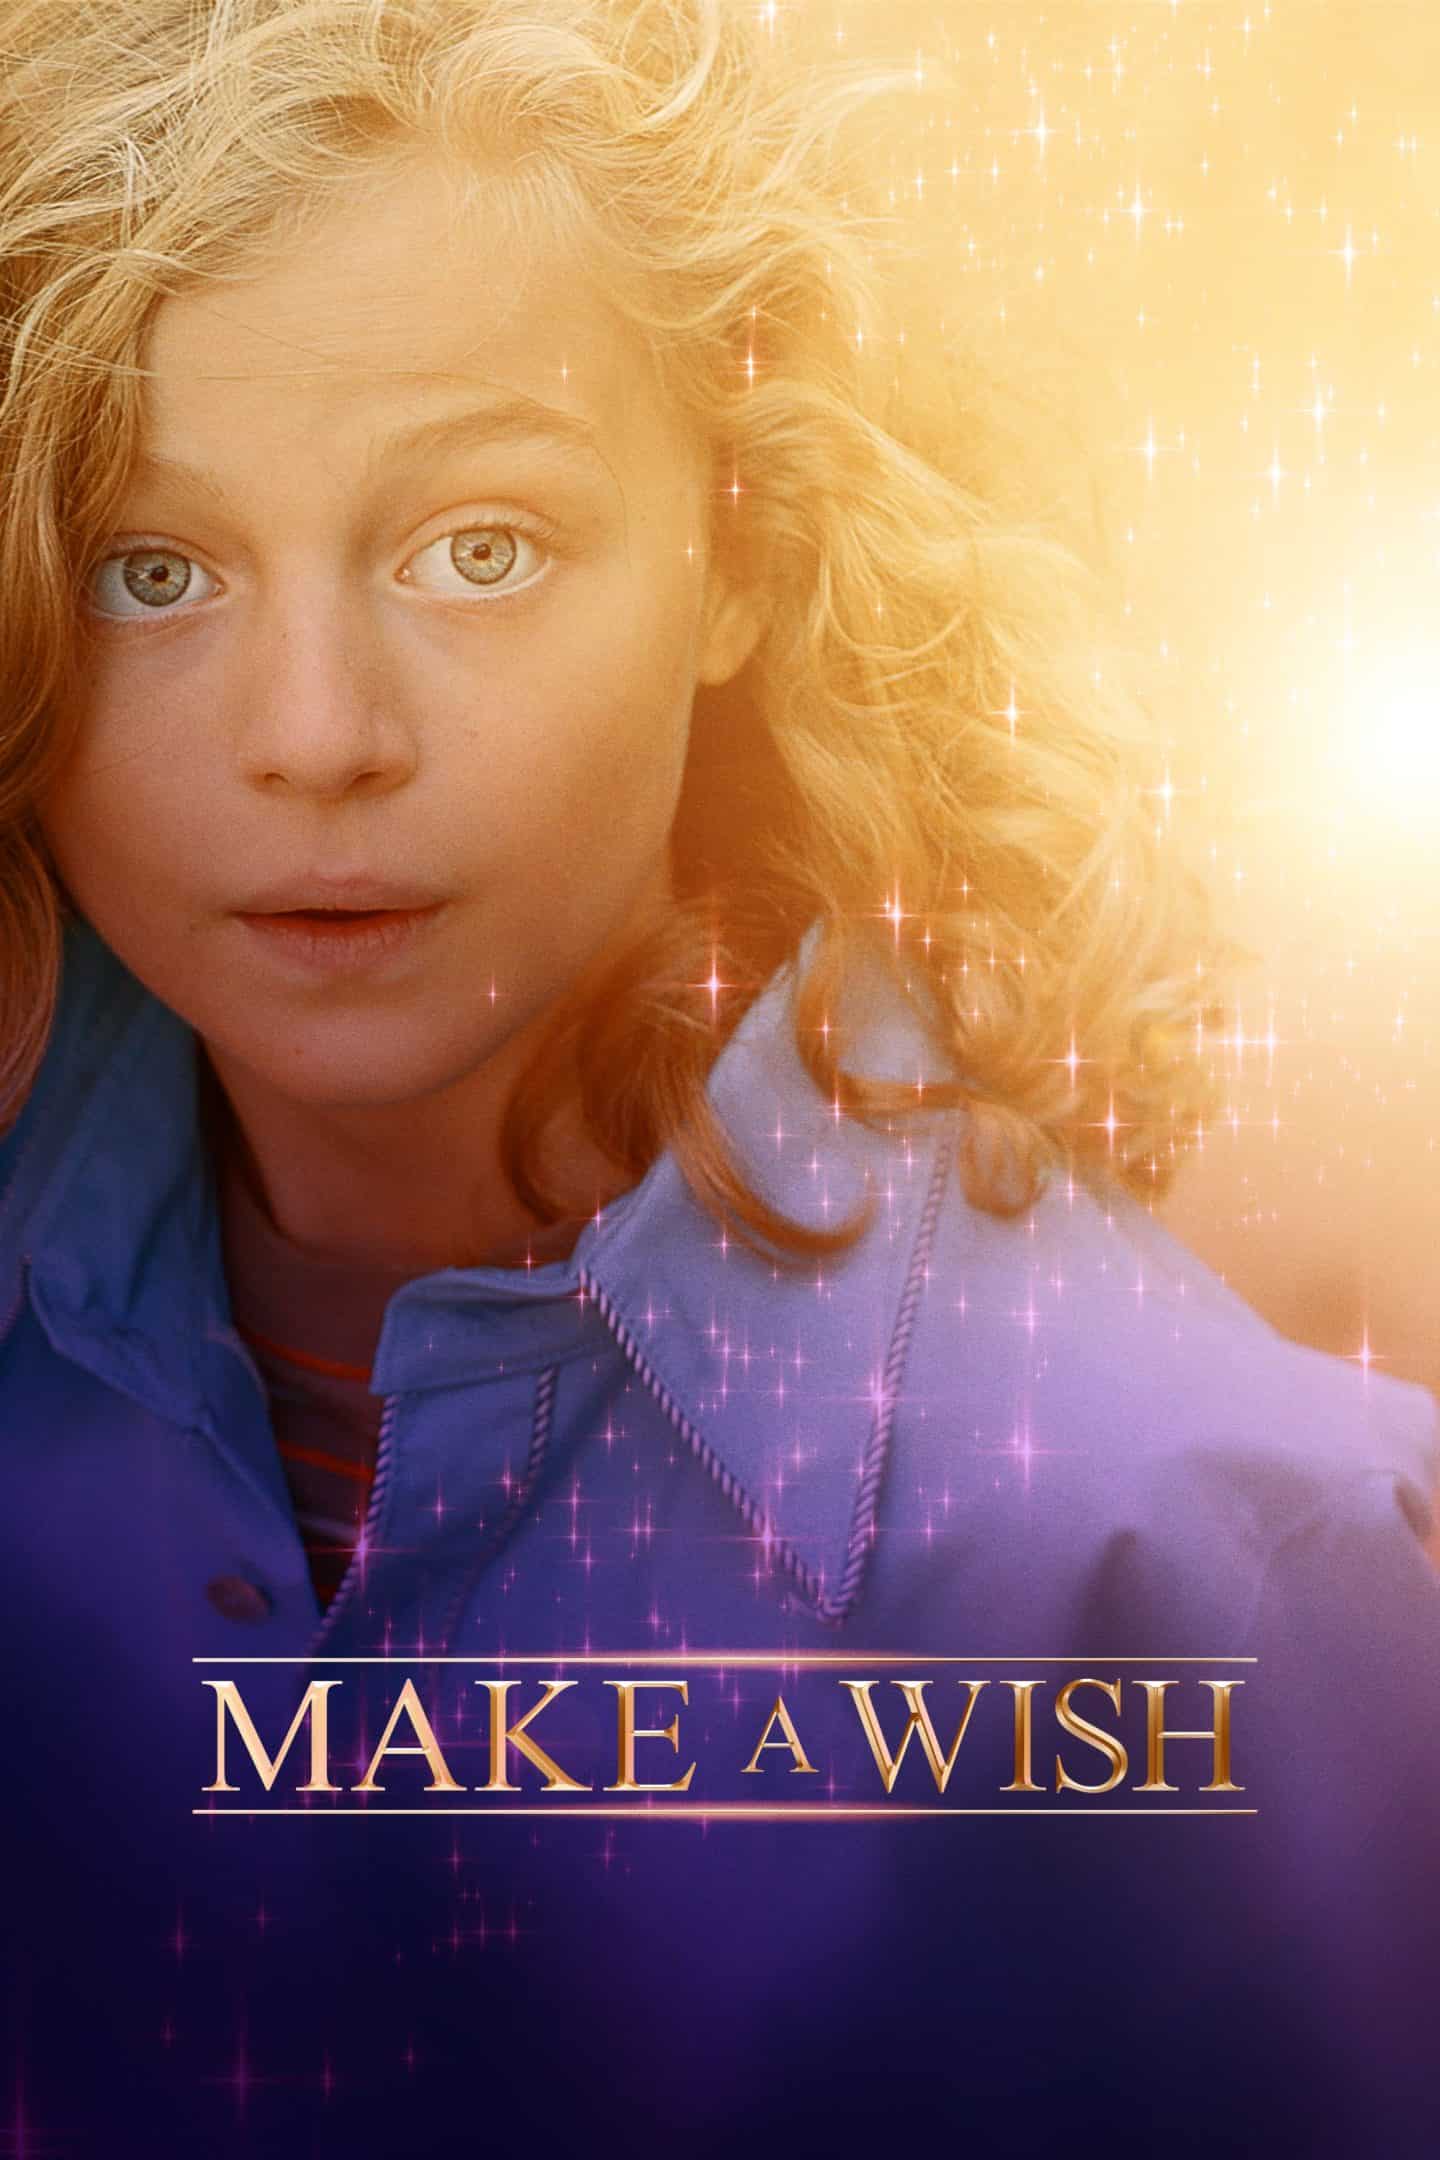 Make A Wish comes to VOD in June 1